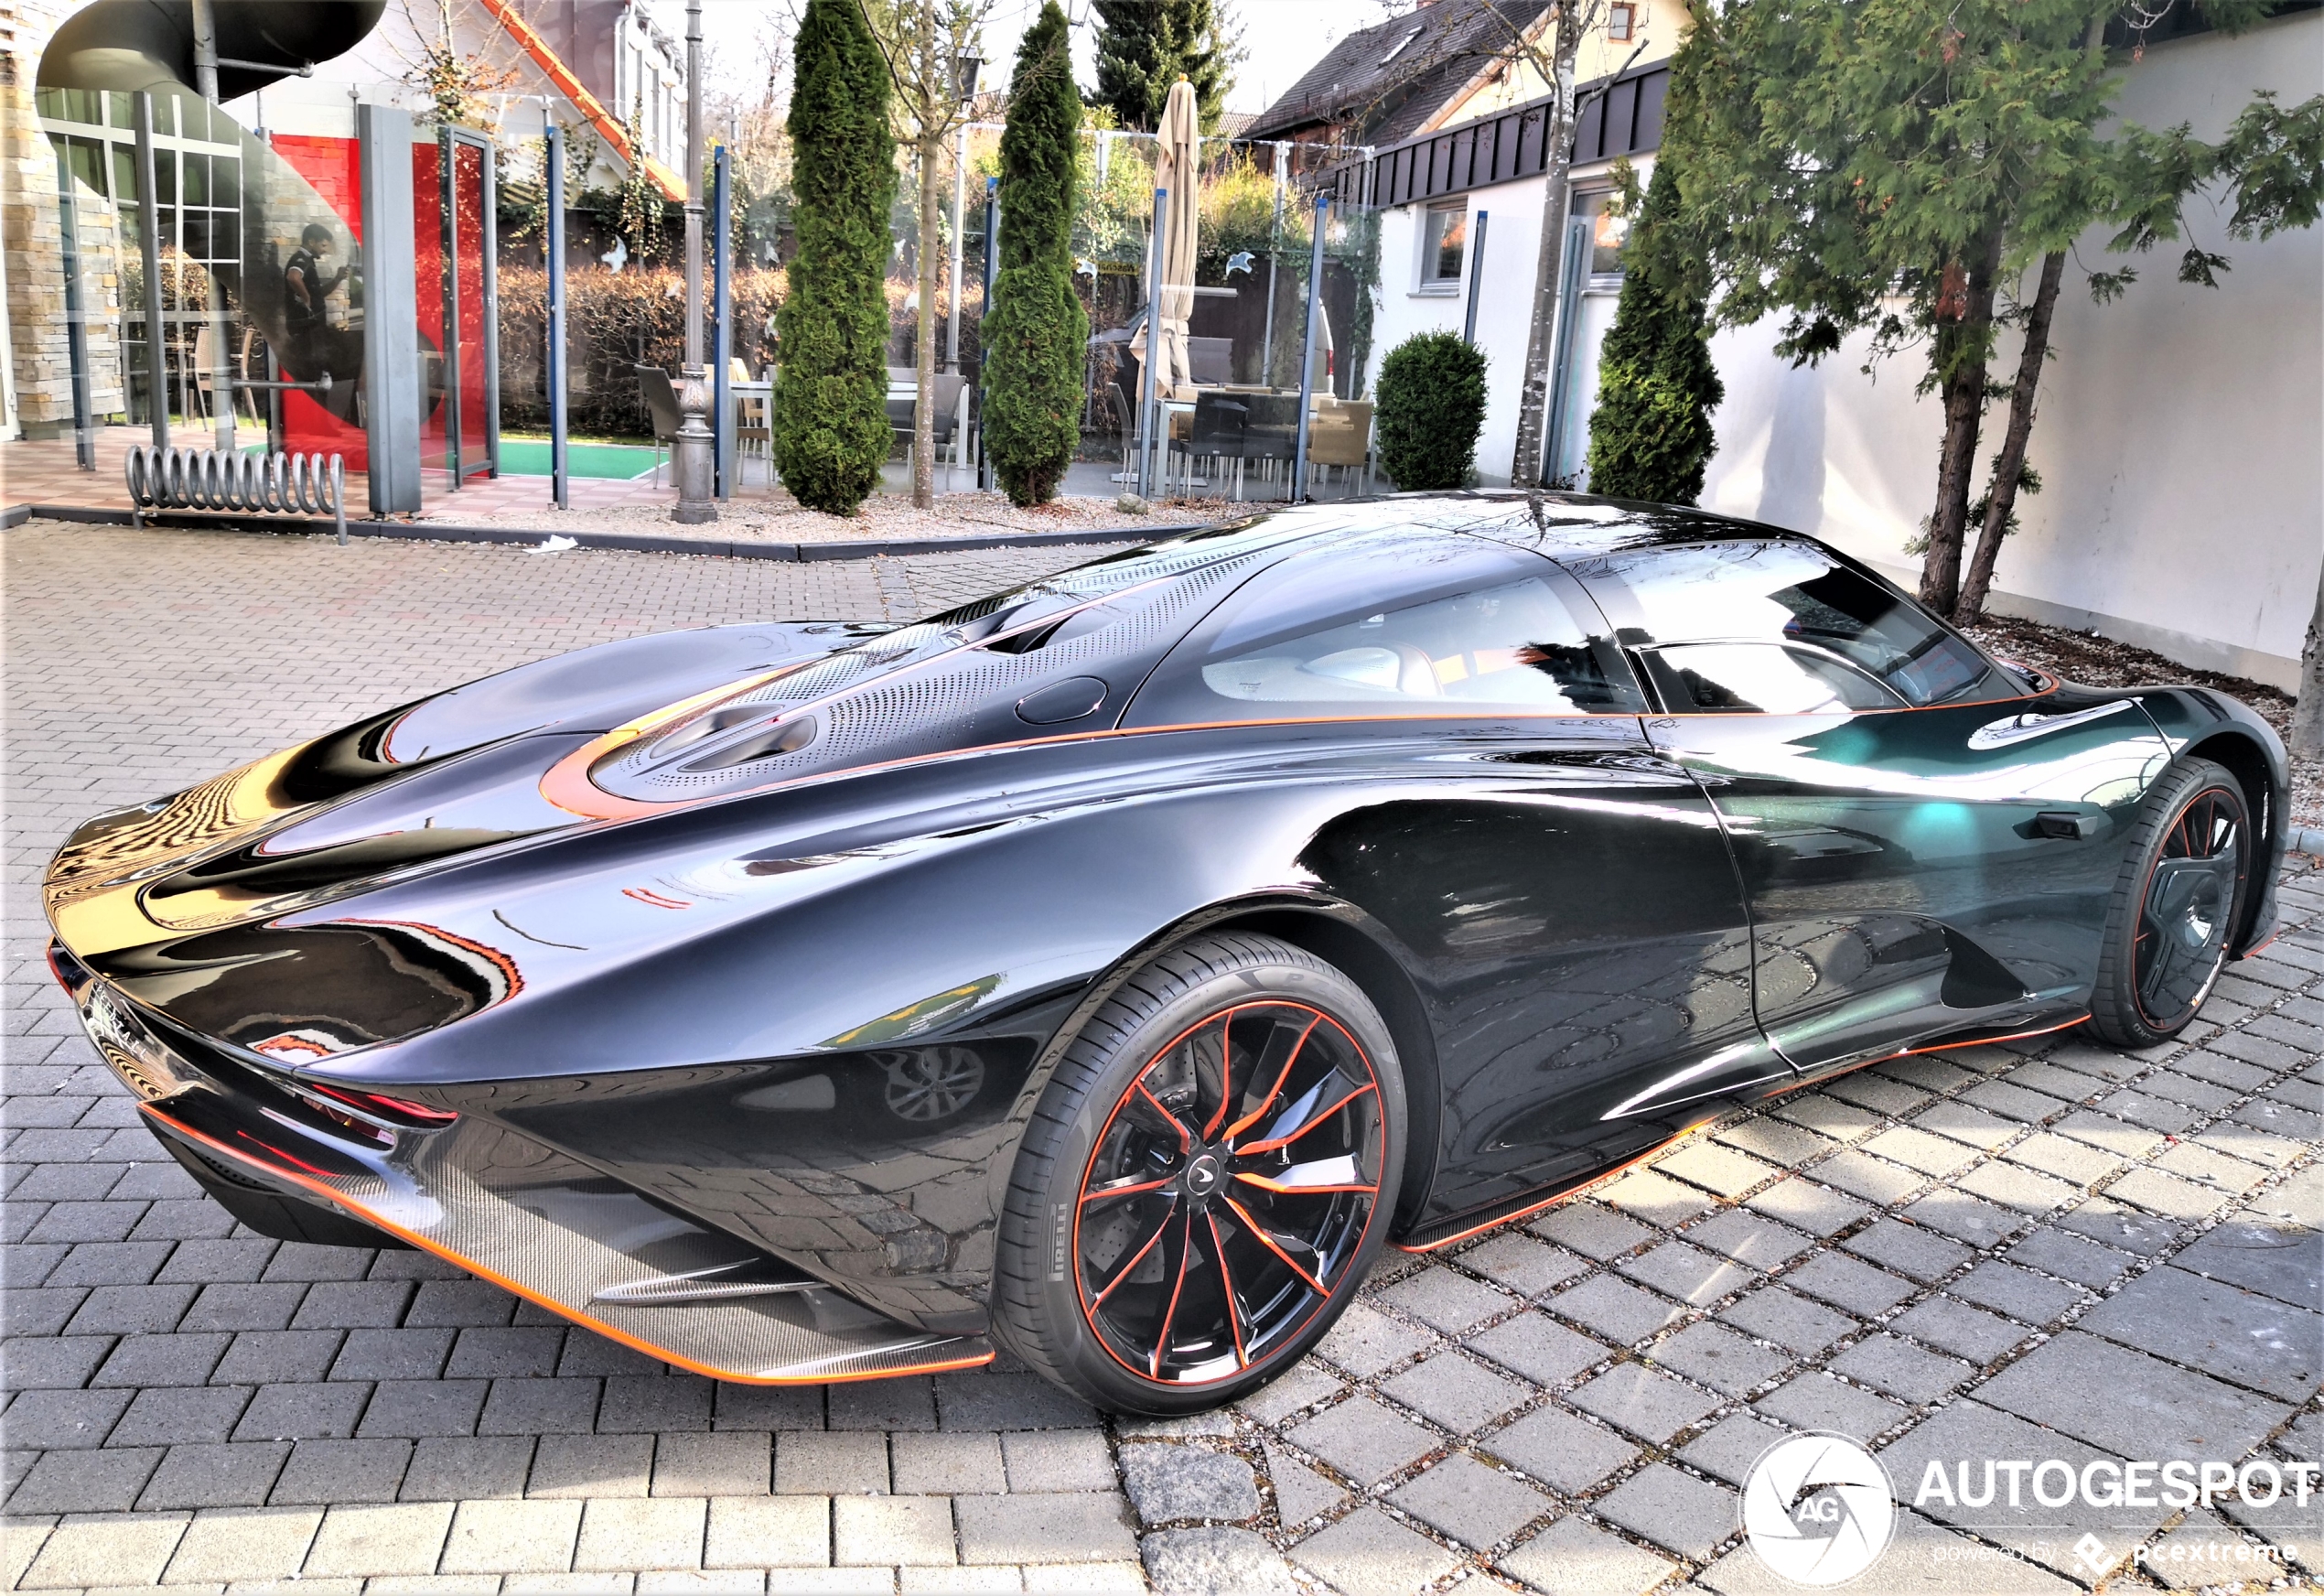 WOW! 2nd McLaren Speedtail shows up in Germany